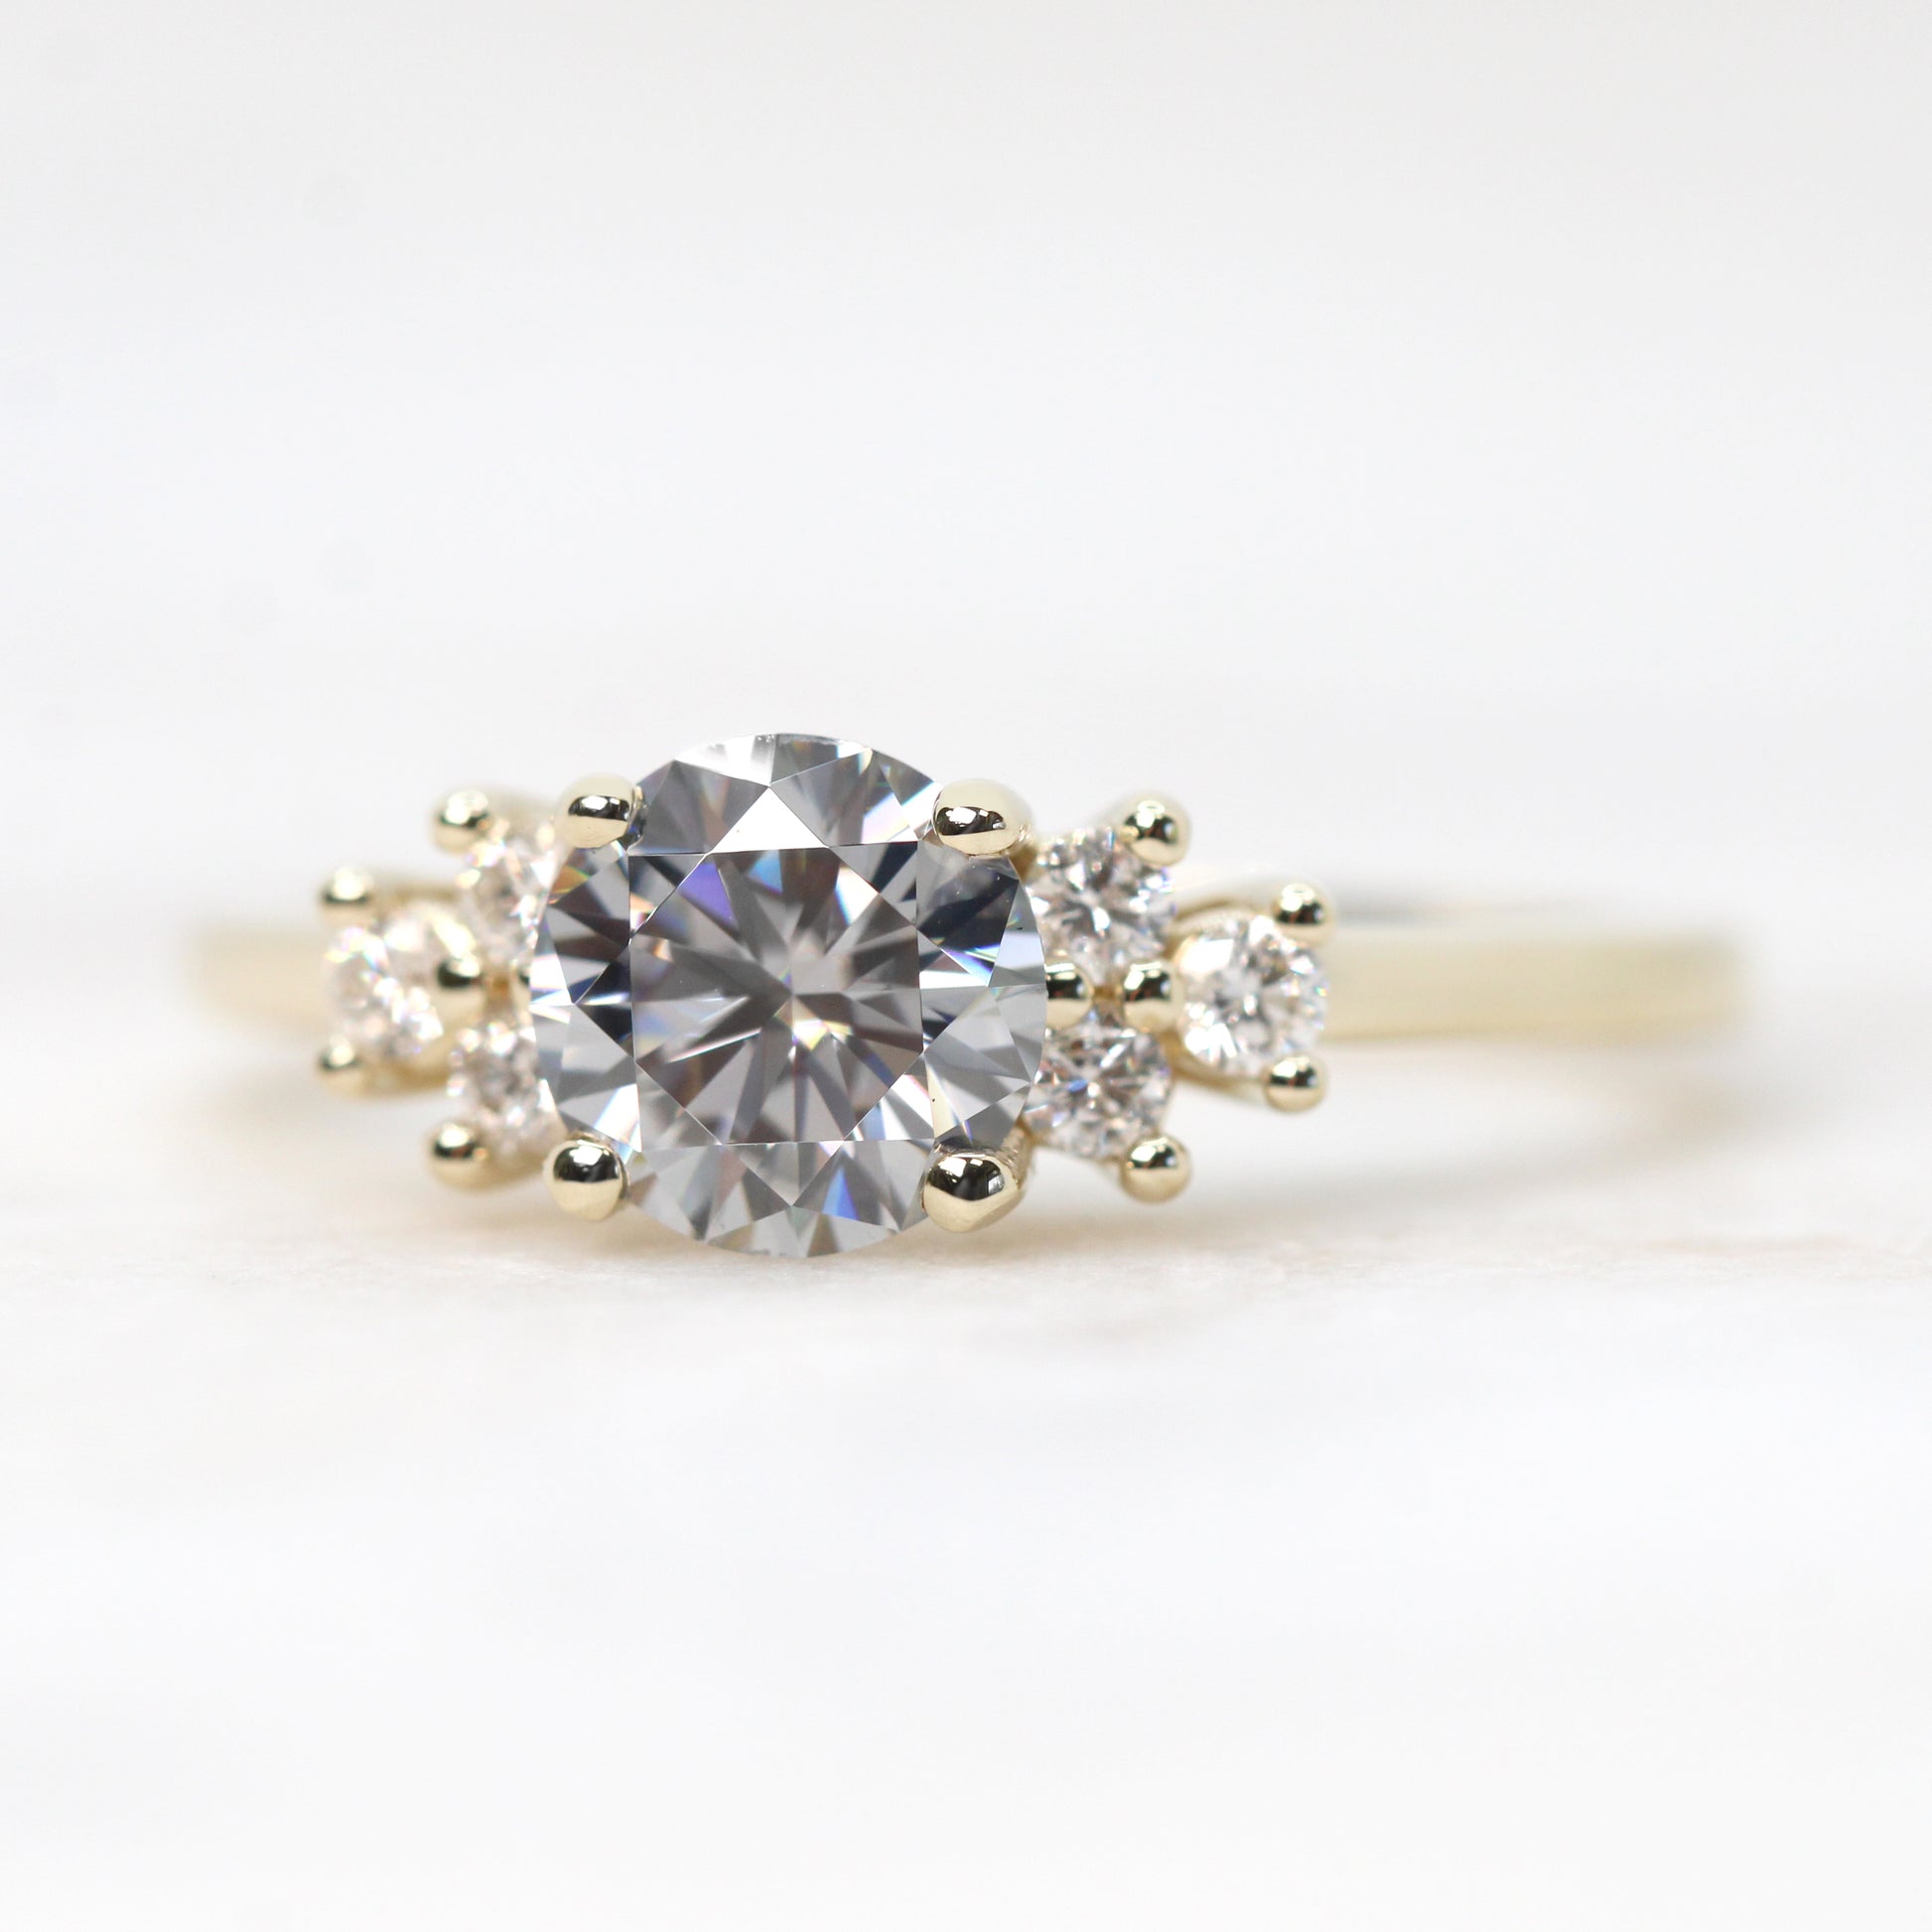 Veragene Ring with a 1 Carat Round Gray Moissanite and White Accent Diamonds - Made to Order, Choose Your Gold Tone - Midwinter Co. Alternative Bridal Rings and Modern Fine Jewelry